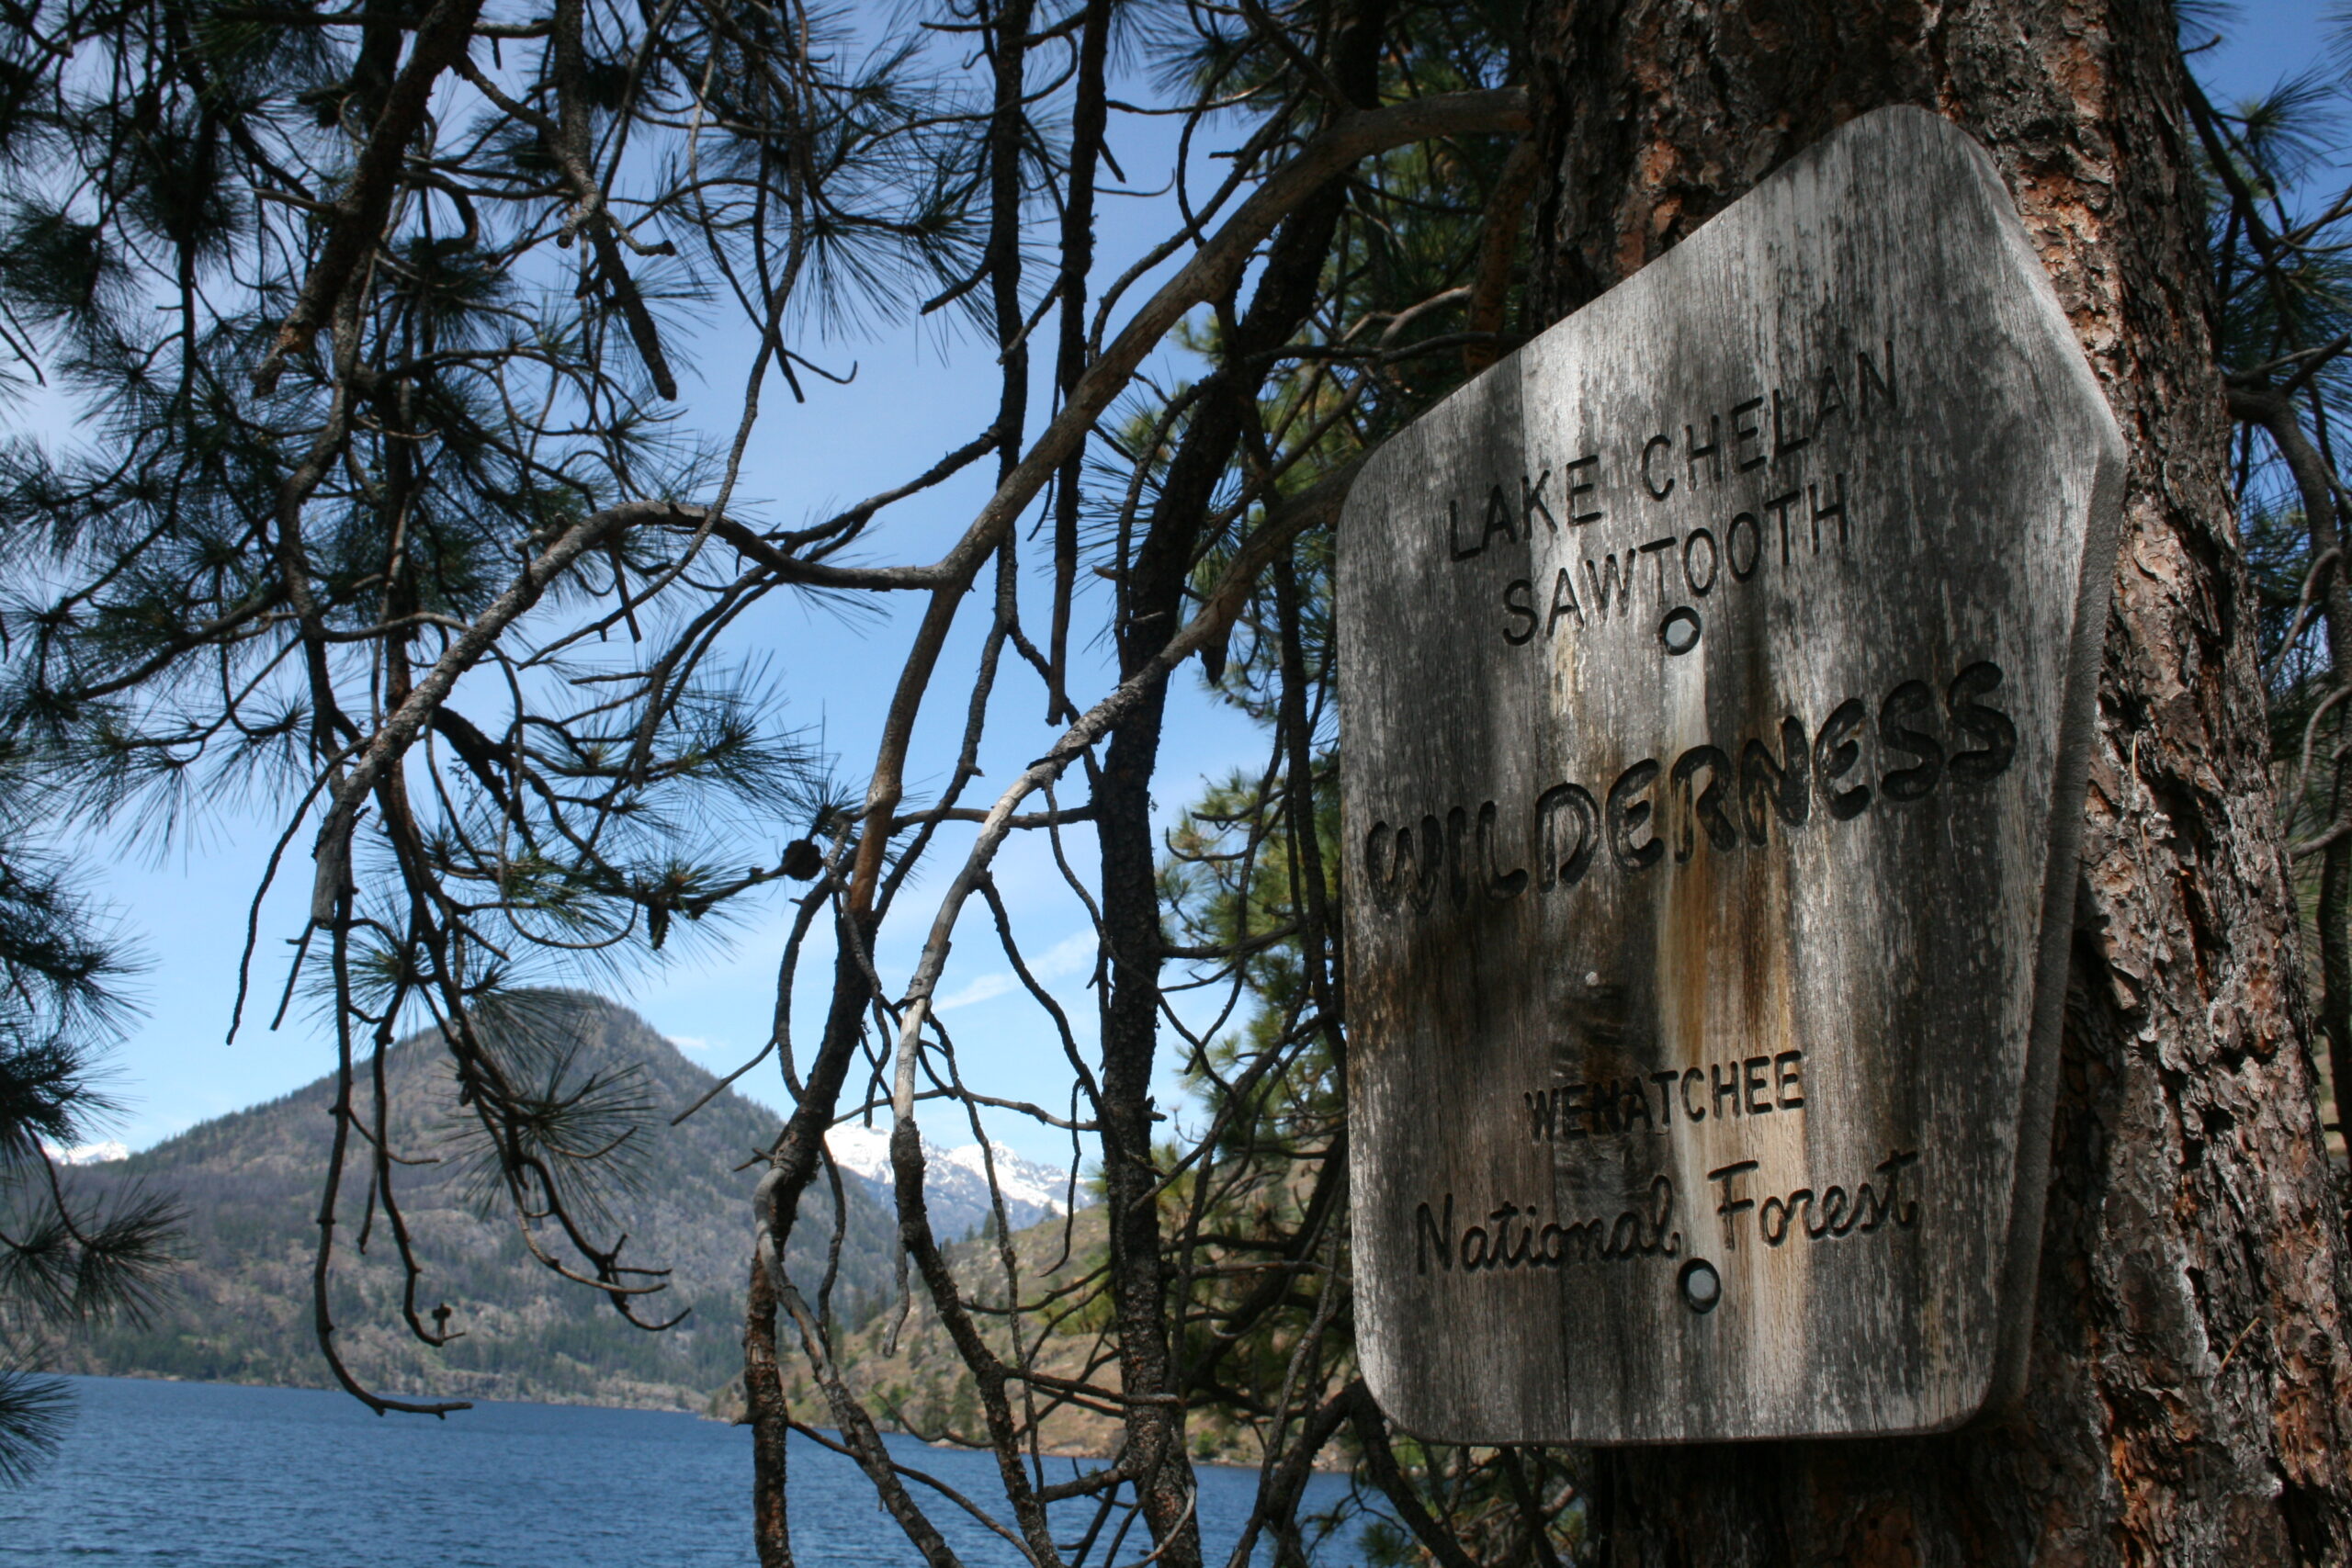 A sign in the Lake Chelan Sawtooth Wilderness